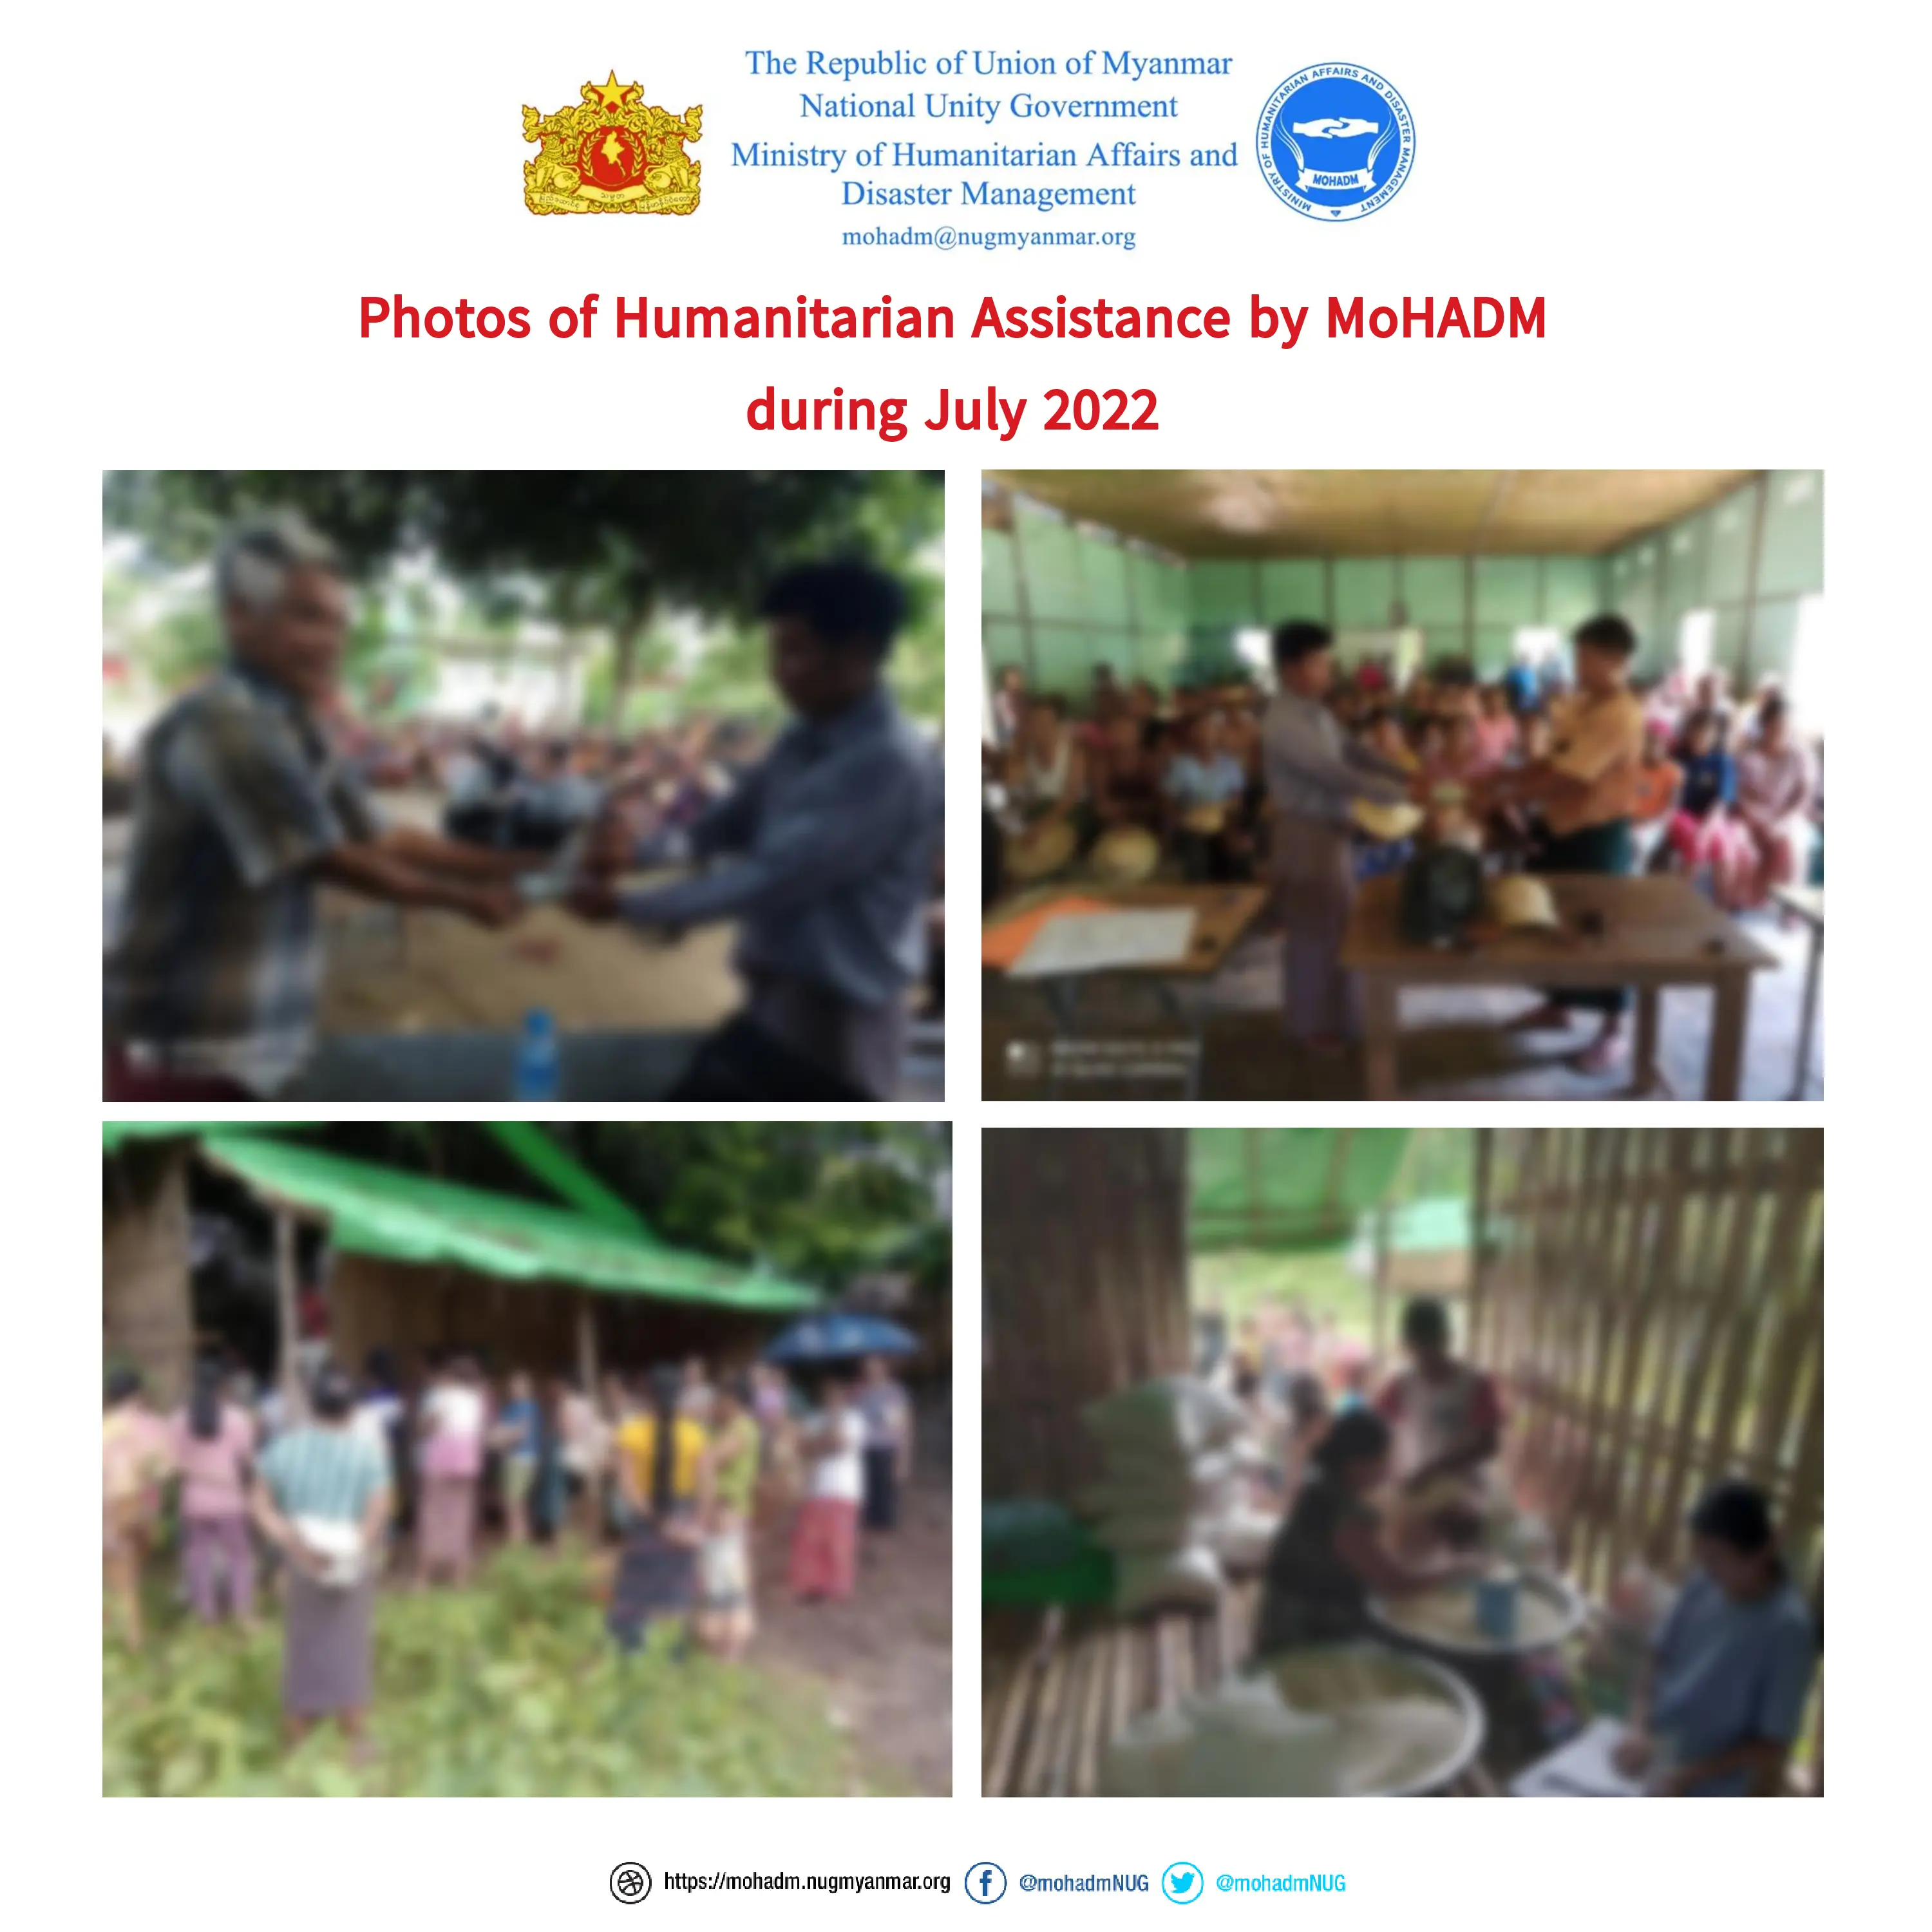 Summary of humanitarian aid provision by MoHADM (July 2022)